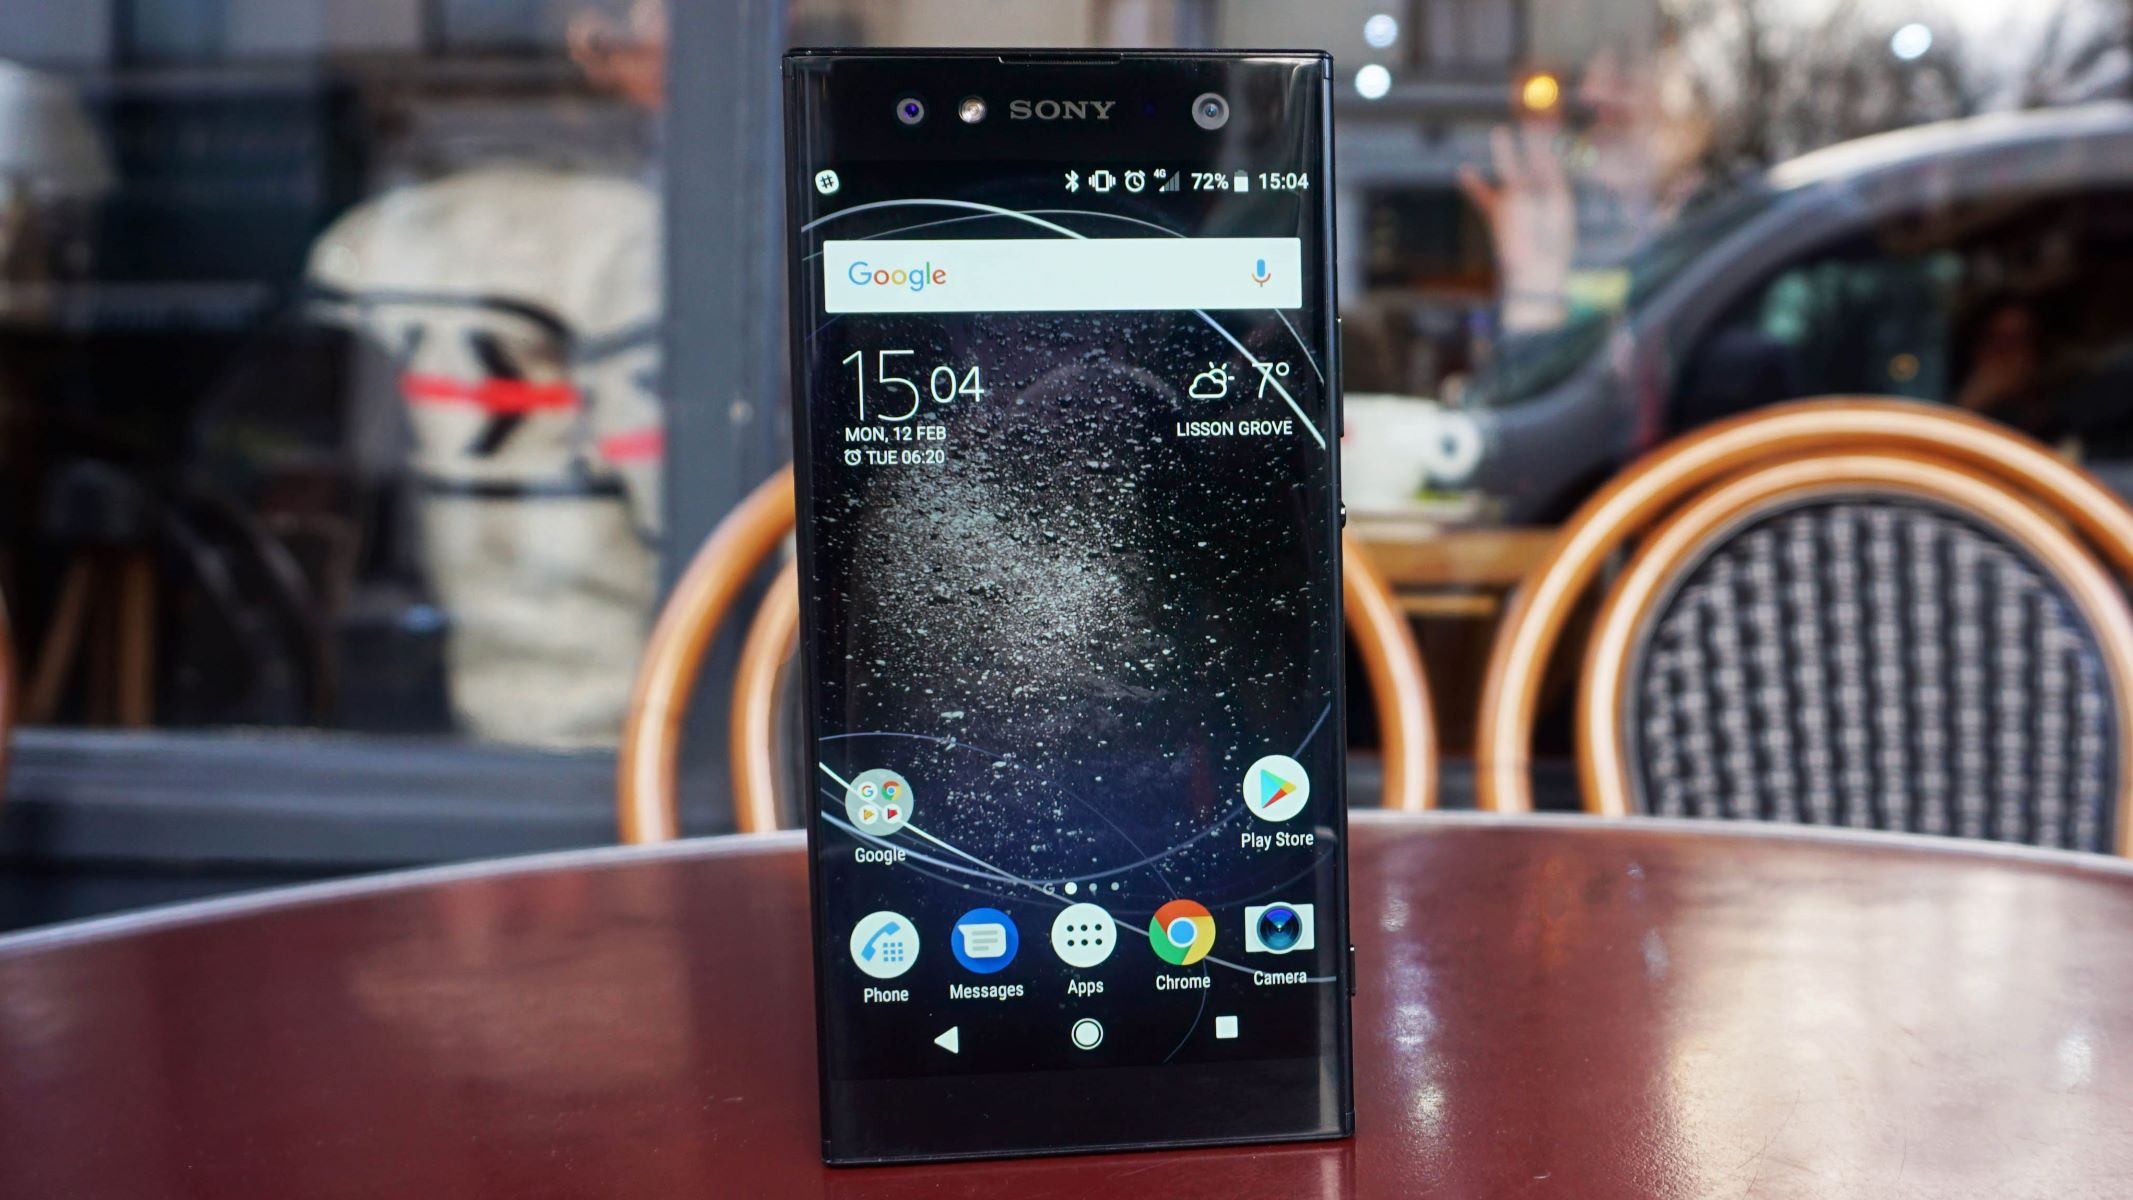 Cosmic Installation: TWRP Guide For Xperia C5306